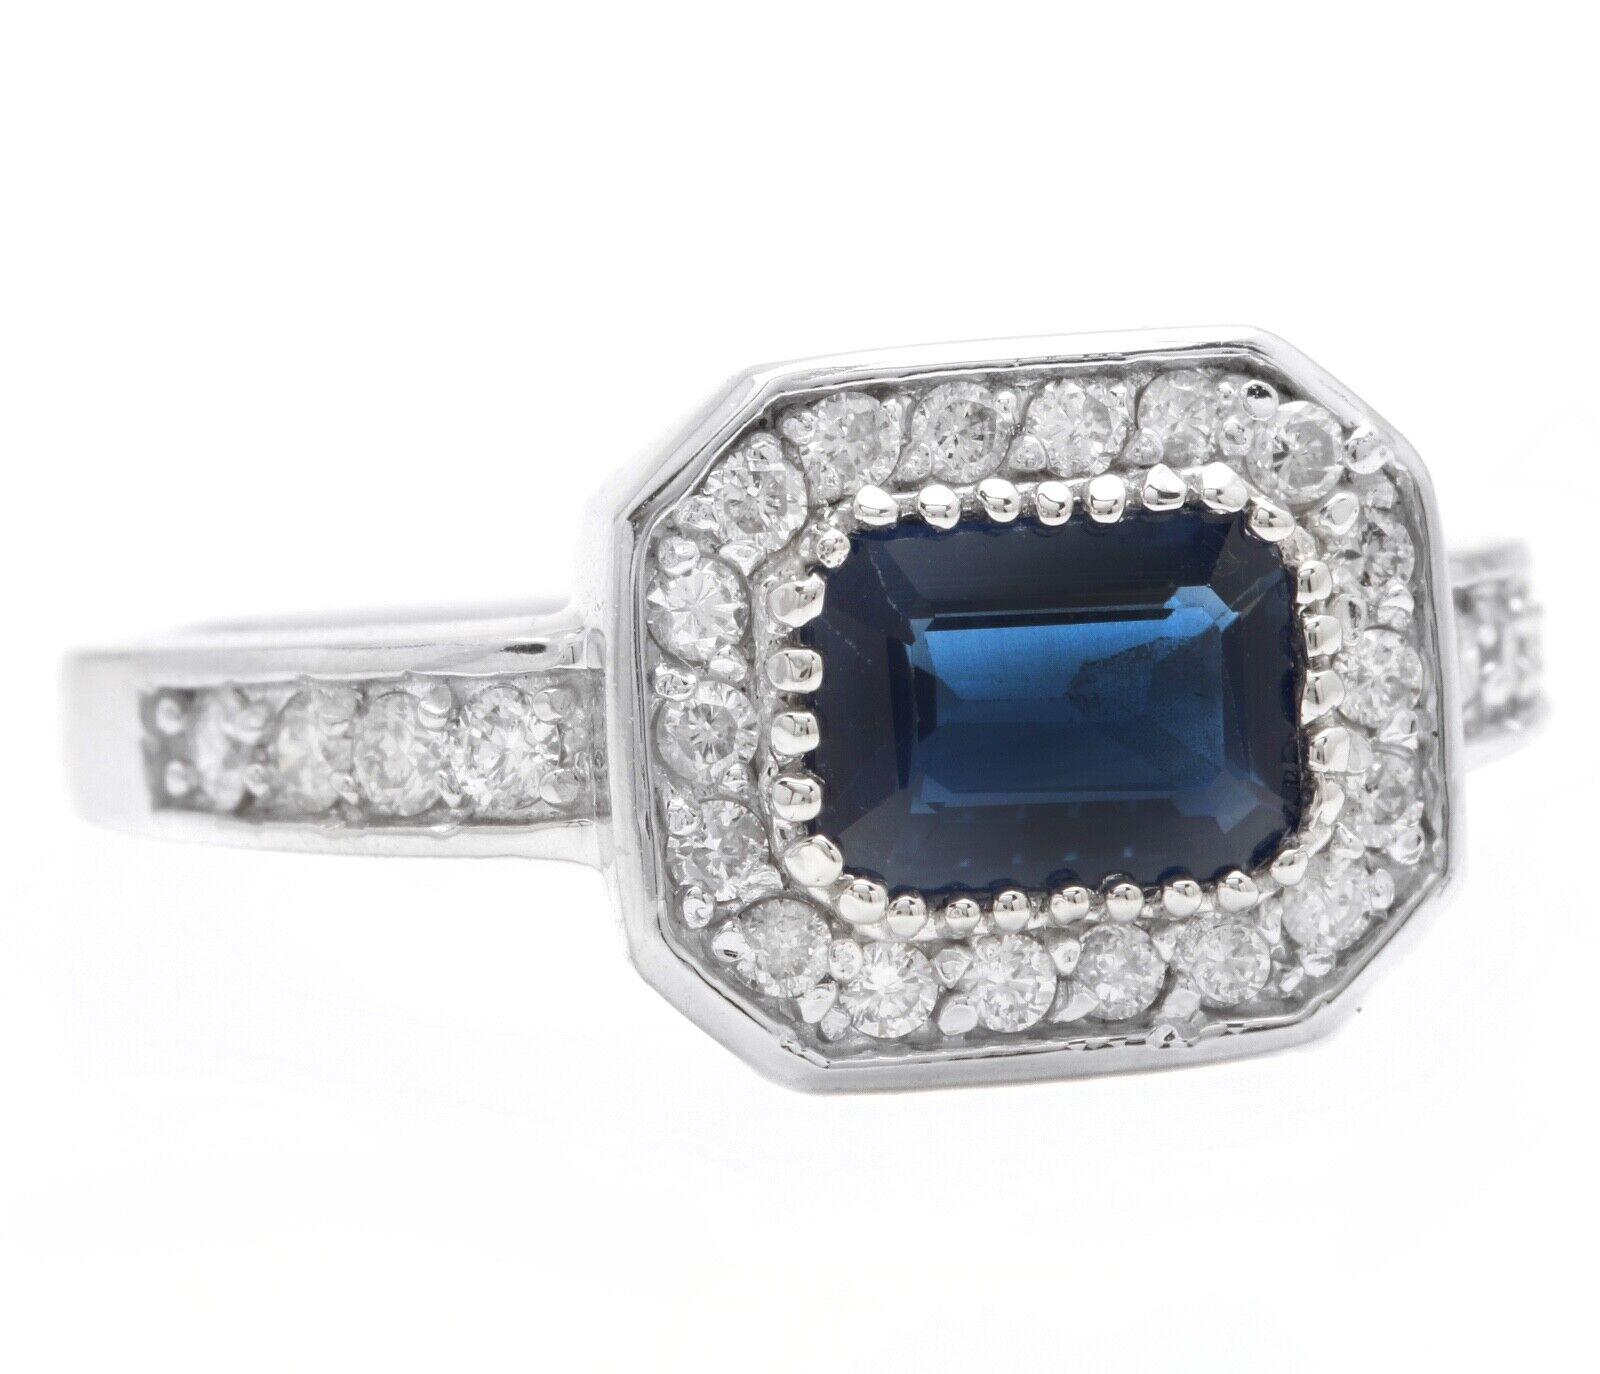 1.50 Carats Exquisite Natural Blue Sapphire and Diamond 14K Solid White Gold Ring

Suggested Replacement Value $5,000.00

Total Blue Sapphire Weight is: 1.10 Carats 

Sapphire Treatment: Heat

Sapphire Measures: 8.00 x 6.00mm

Natural Round Diamonds